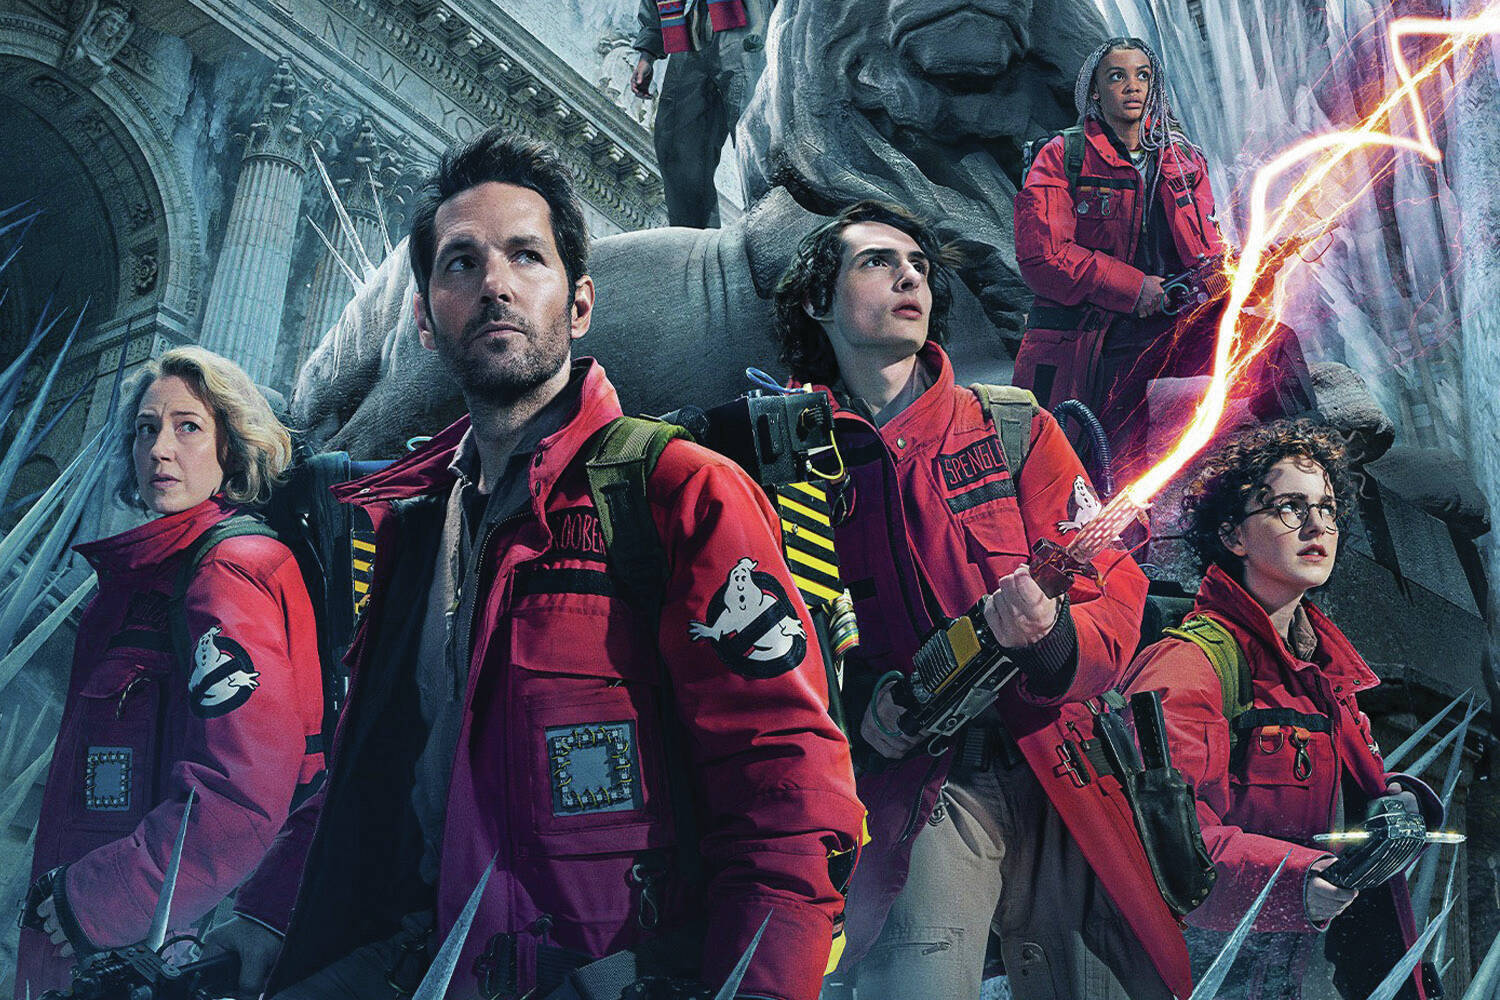 Promotional photo courtesy Sony Pictures
Carrie Coon, Paul Rudd, Finn Wolfhard, Mckenna Grace and Celeste O’Connor appear in “Ghostbusters: Frozen Empire.”